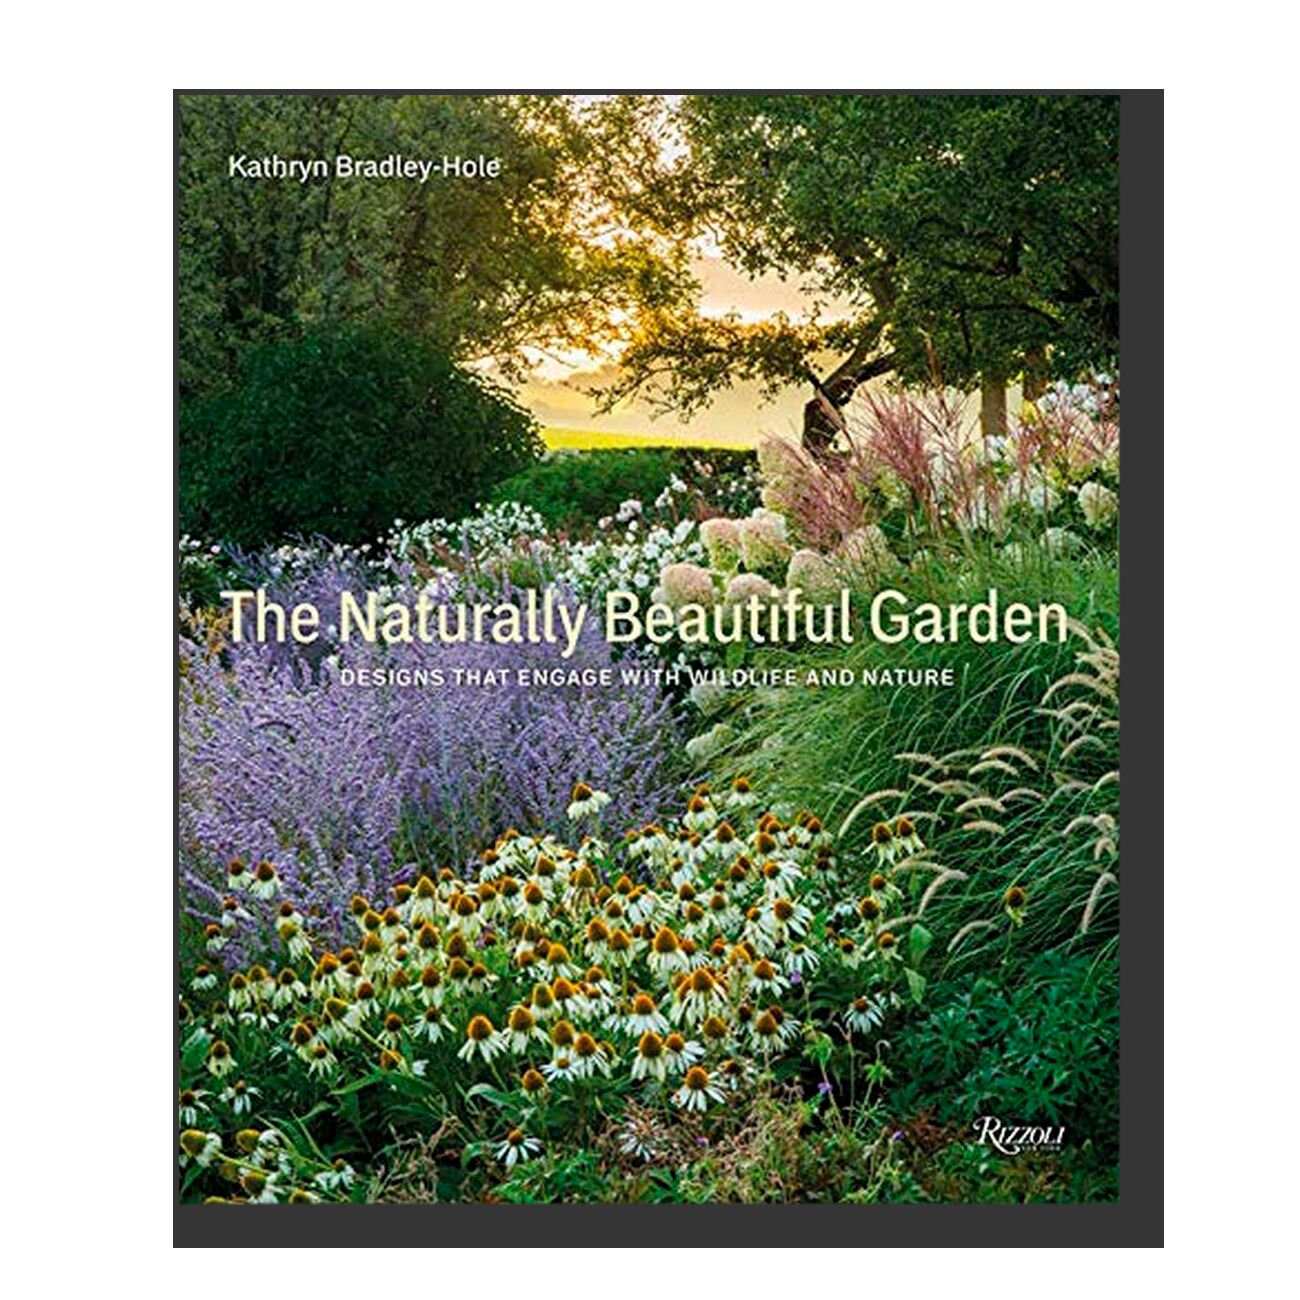 The Naturally Beautiful Garden: Contemporary Designs to Please the Eye and Support Nature